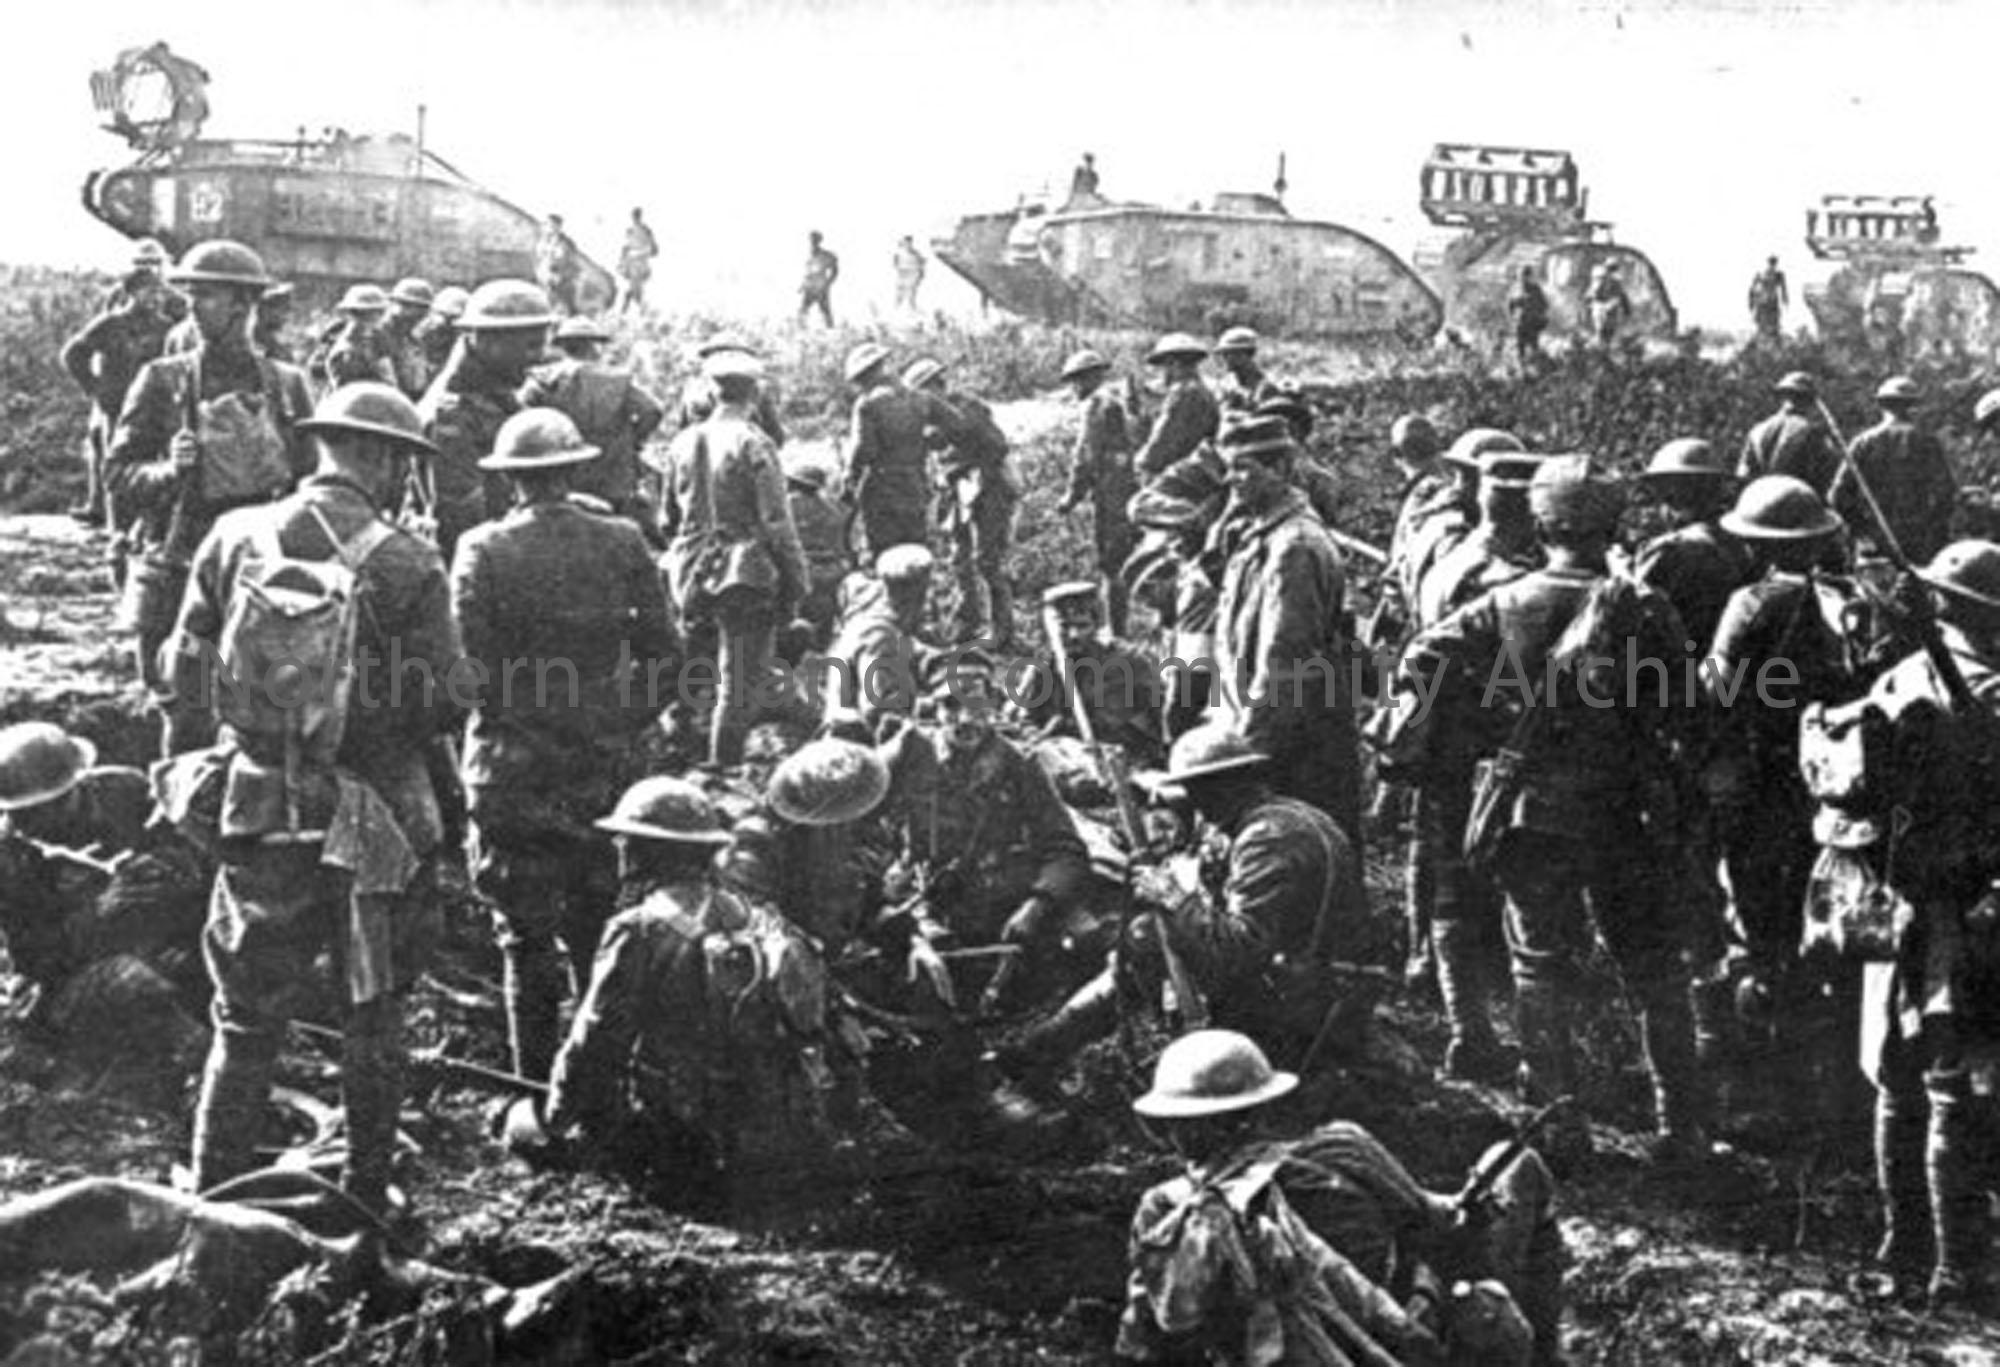 A crowd of German prisoners are escorted by British troops. In the background a column of tanks move to the front line. On the front of three of the t…